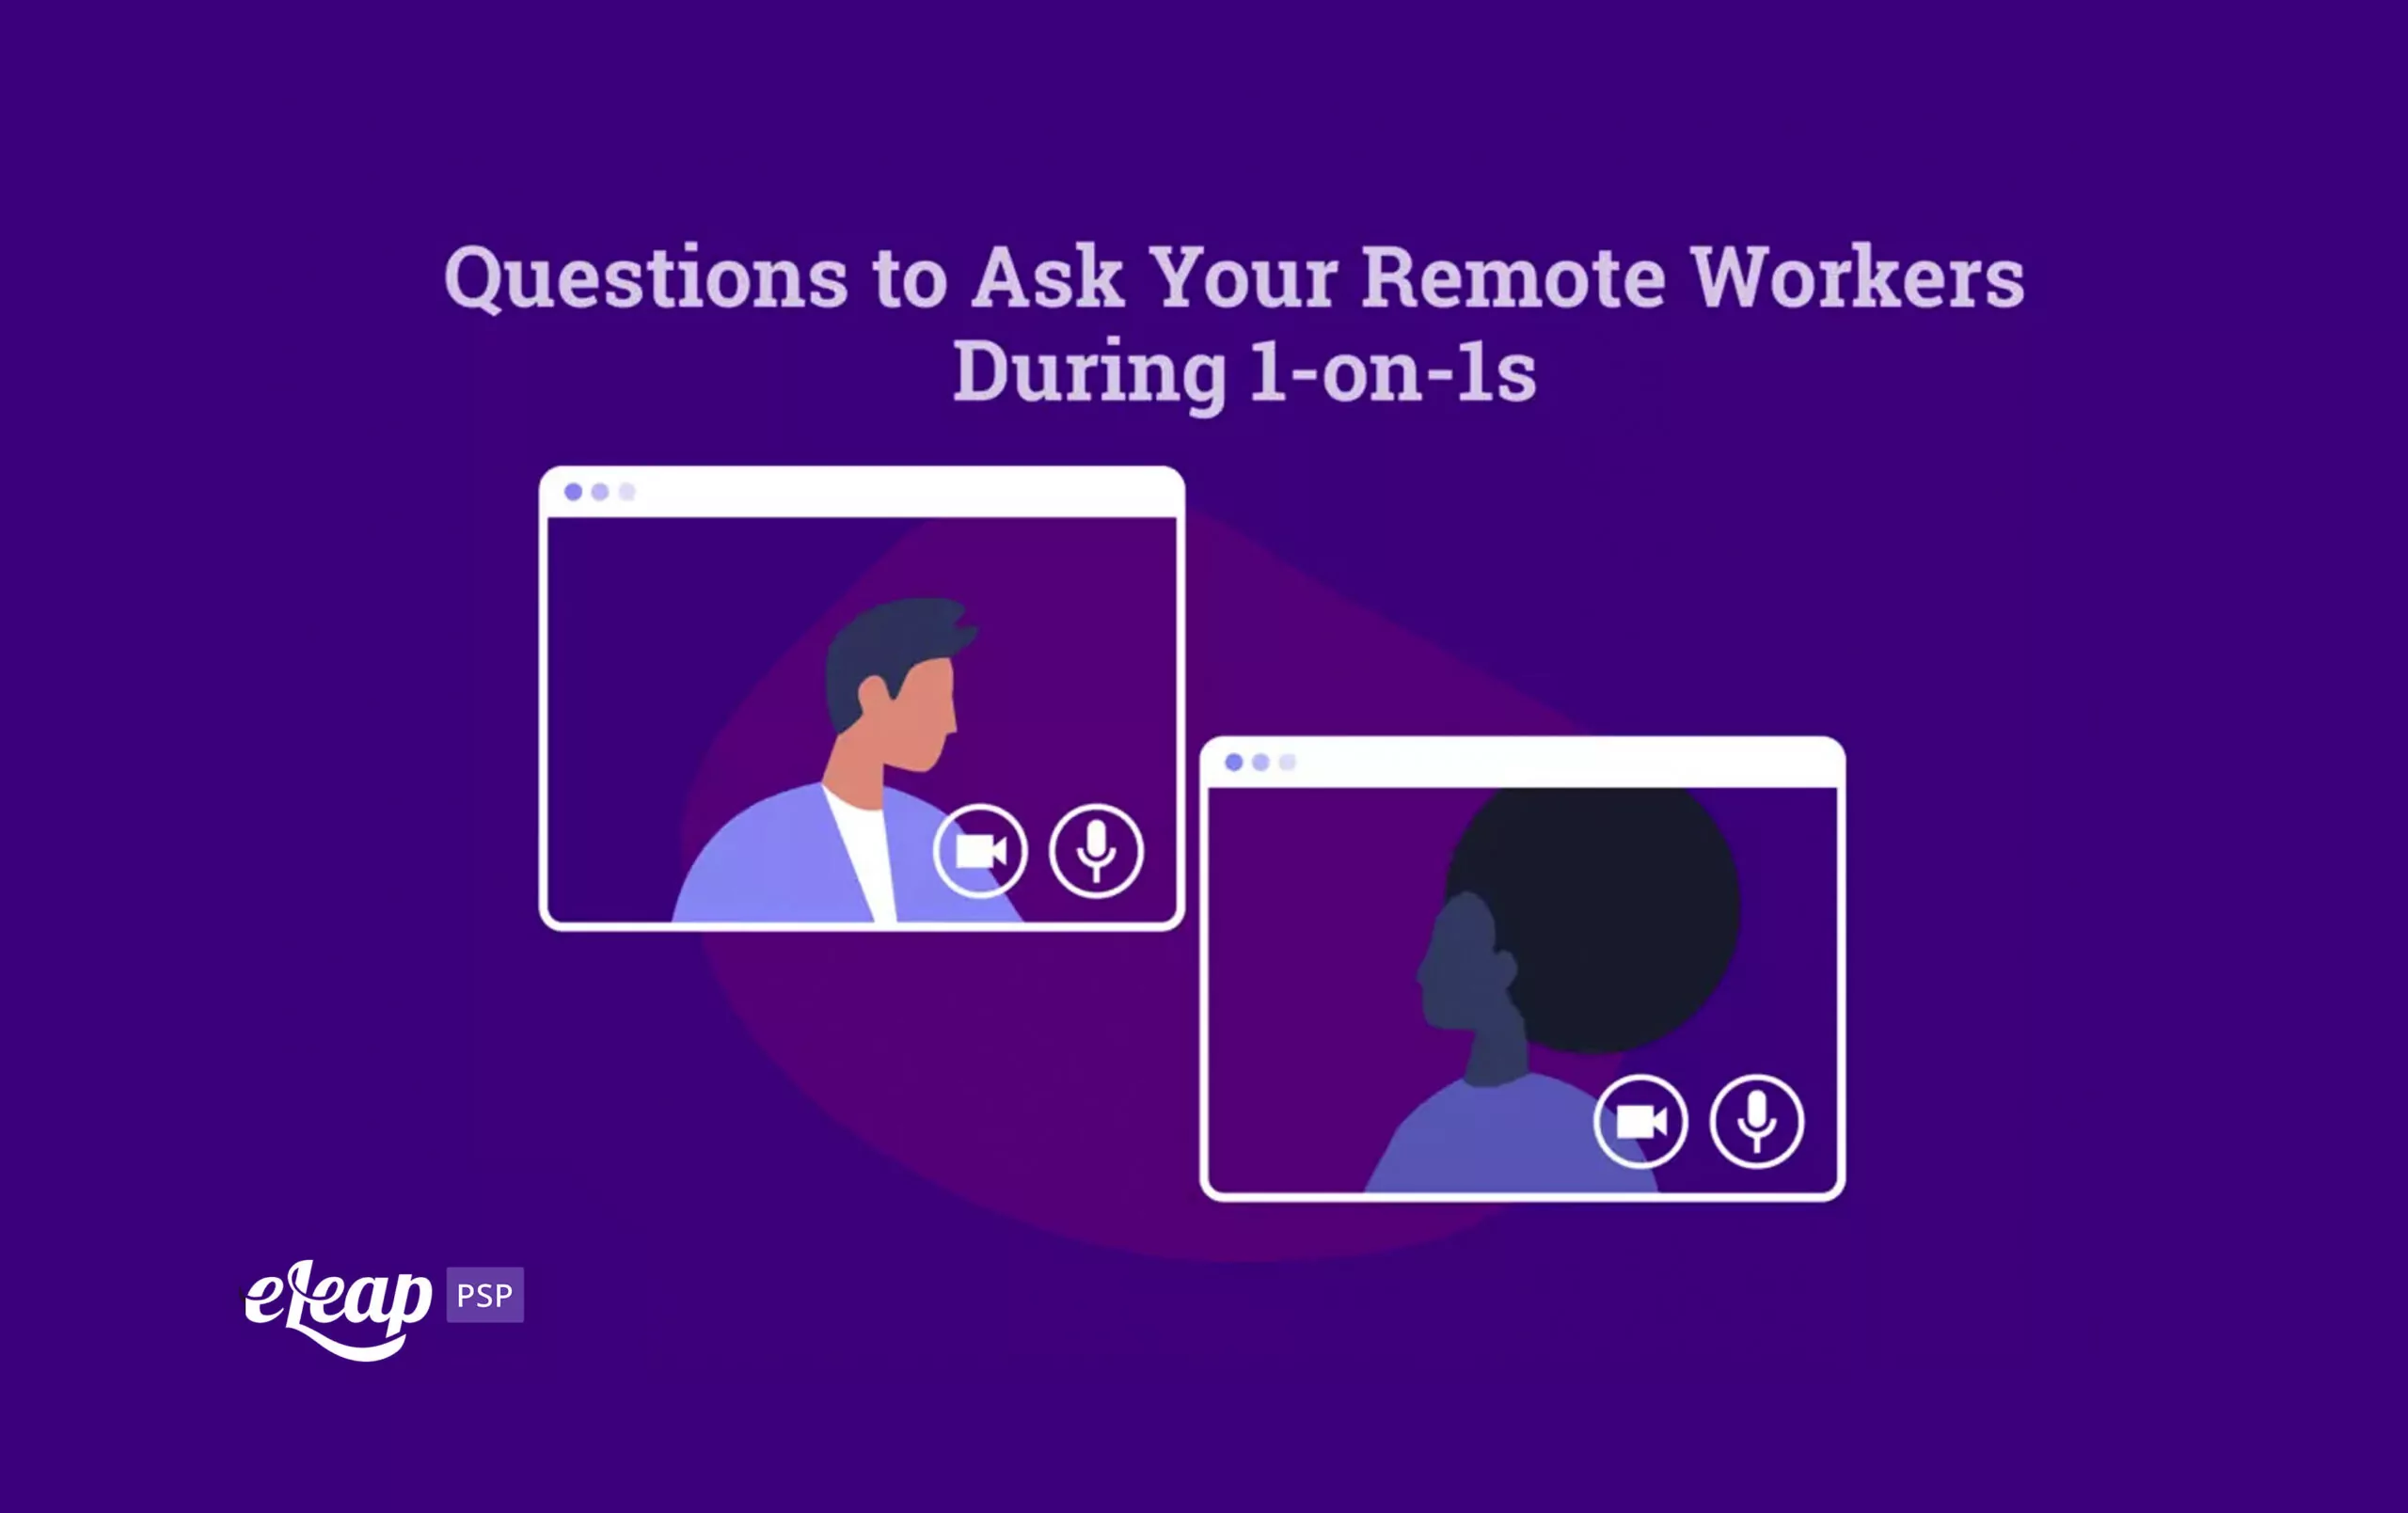 Questions to Ask Your Remote Workers During 1-on-1s